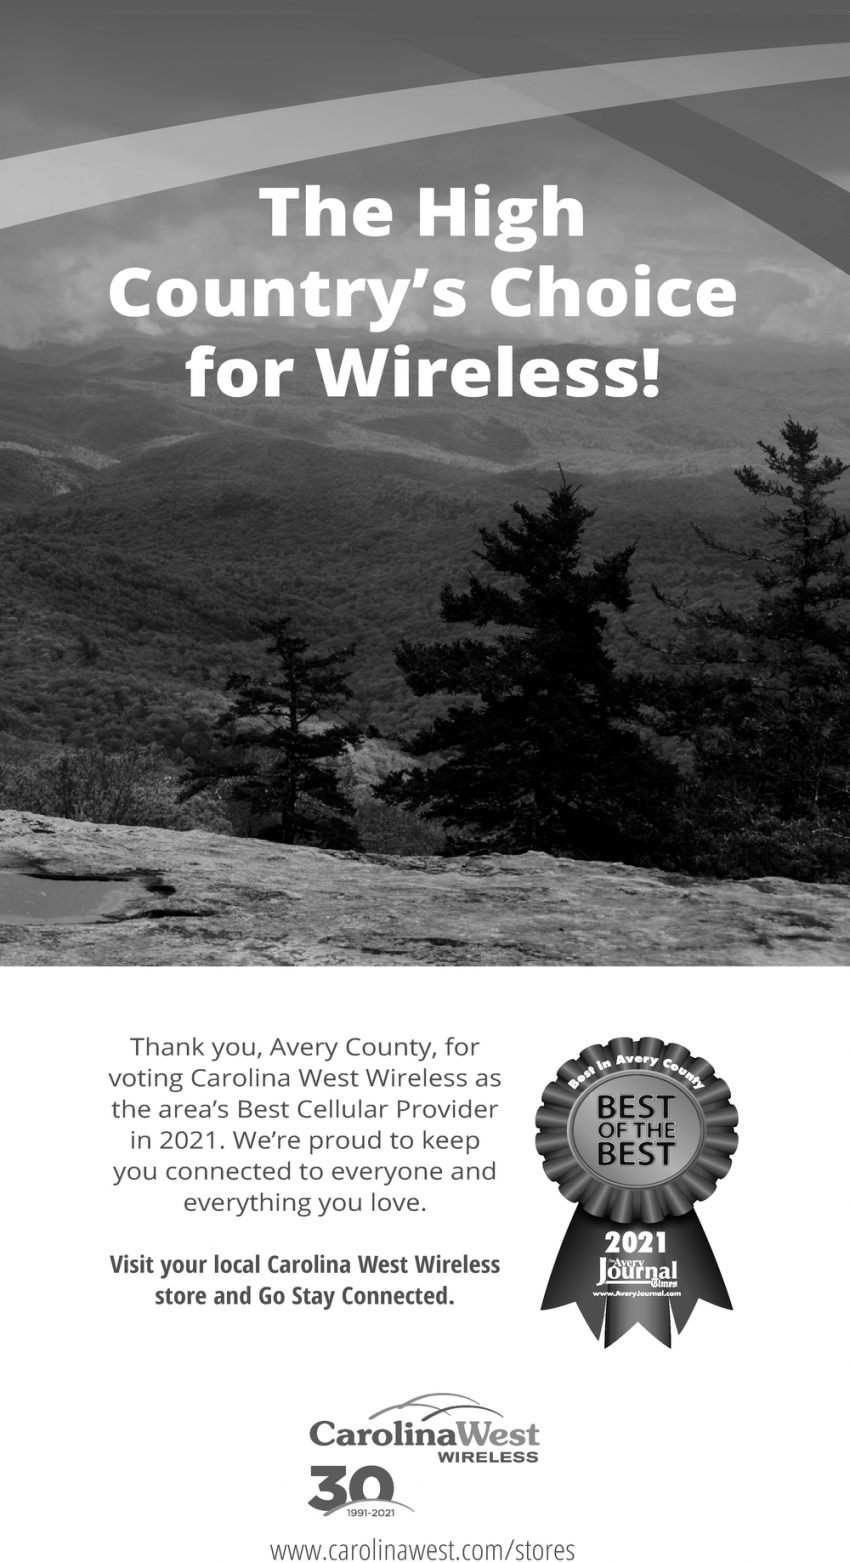 The High Country's Choice for Wireless!